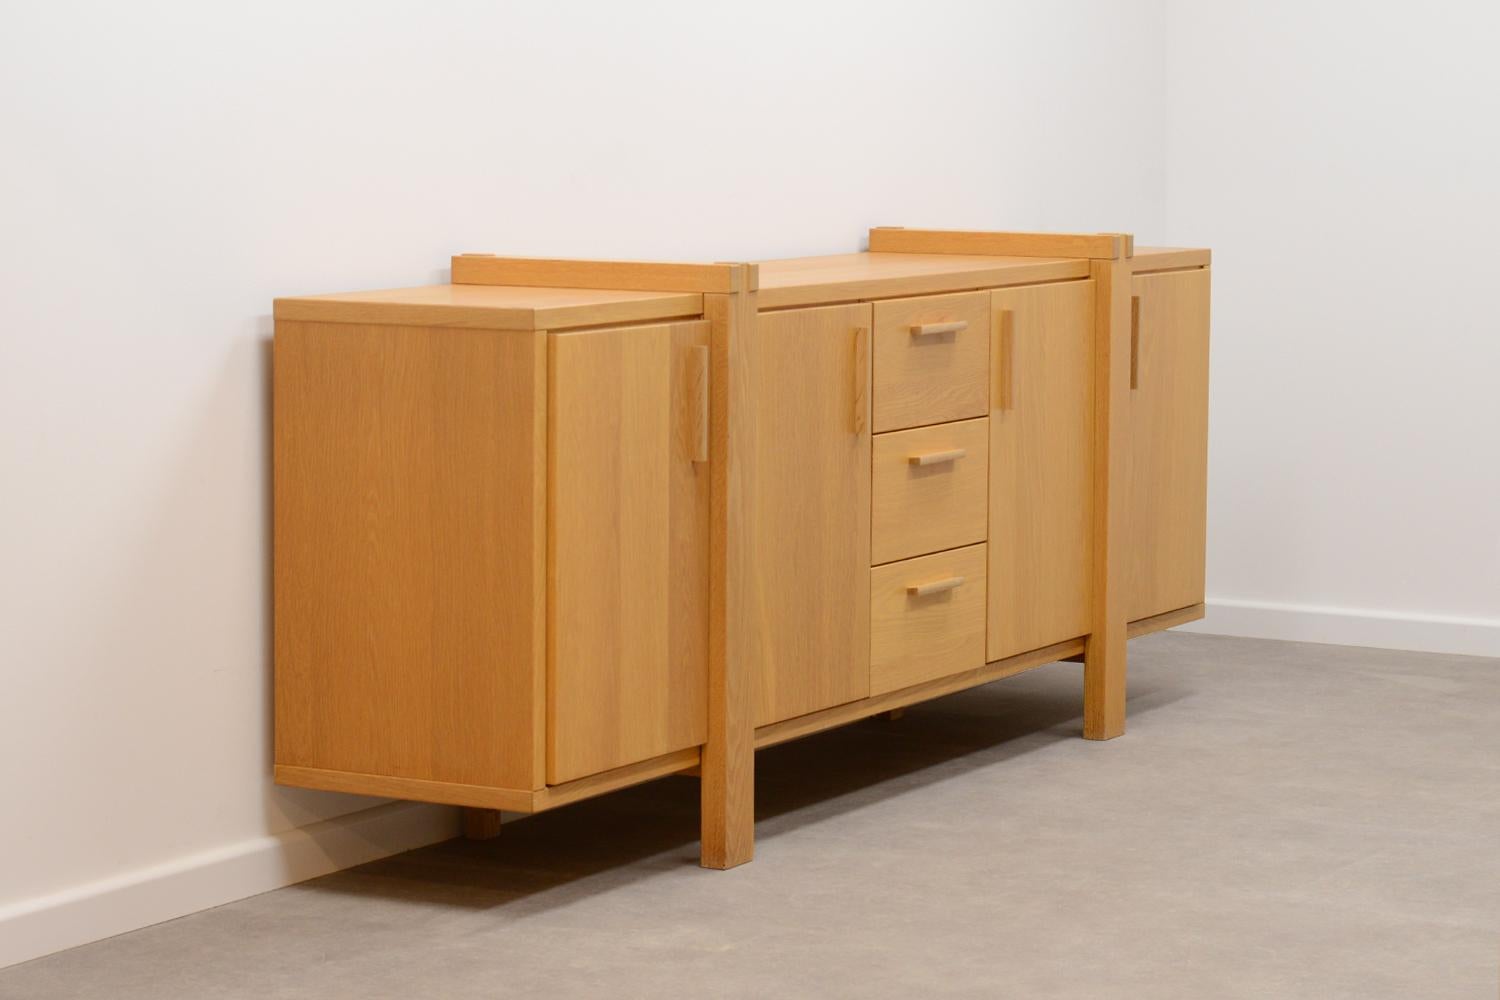 Large Belgium oak sideboard. Mostly made of solid oak. 3 drawers and 4 doors. Behind every door are modular shelfs. In very good vintage condition.